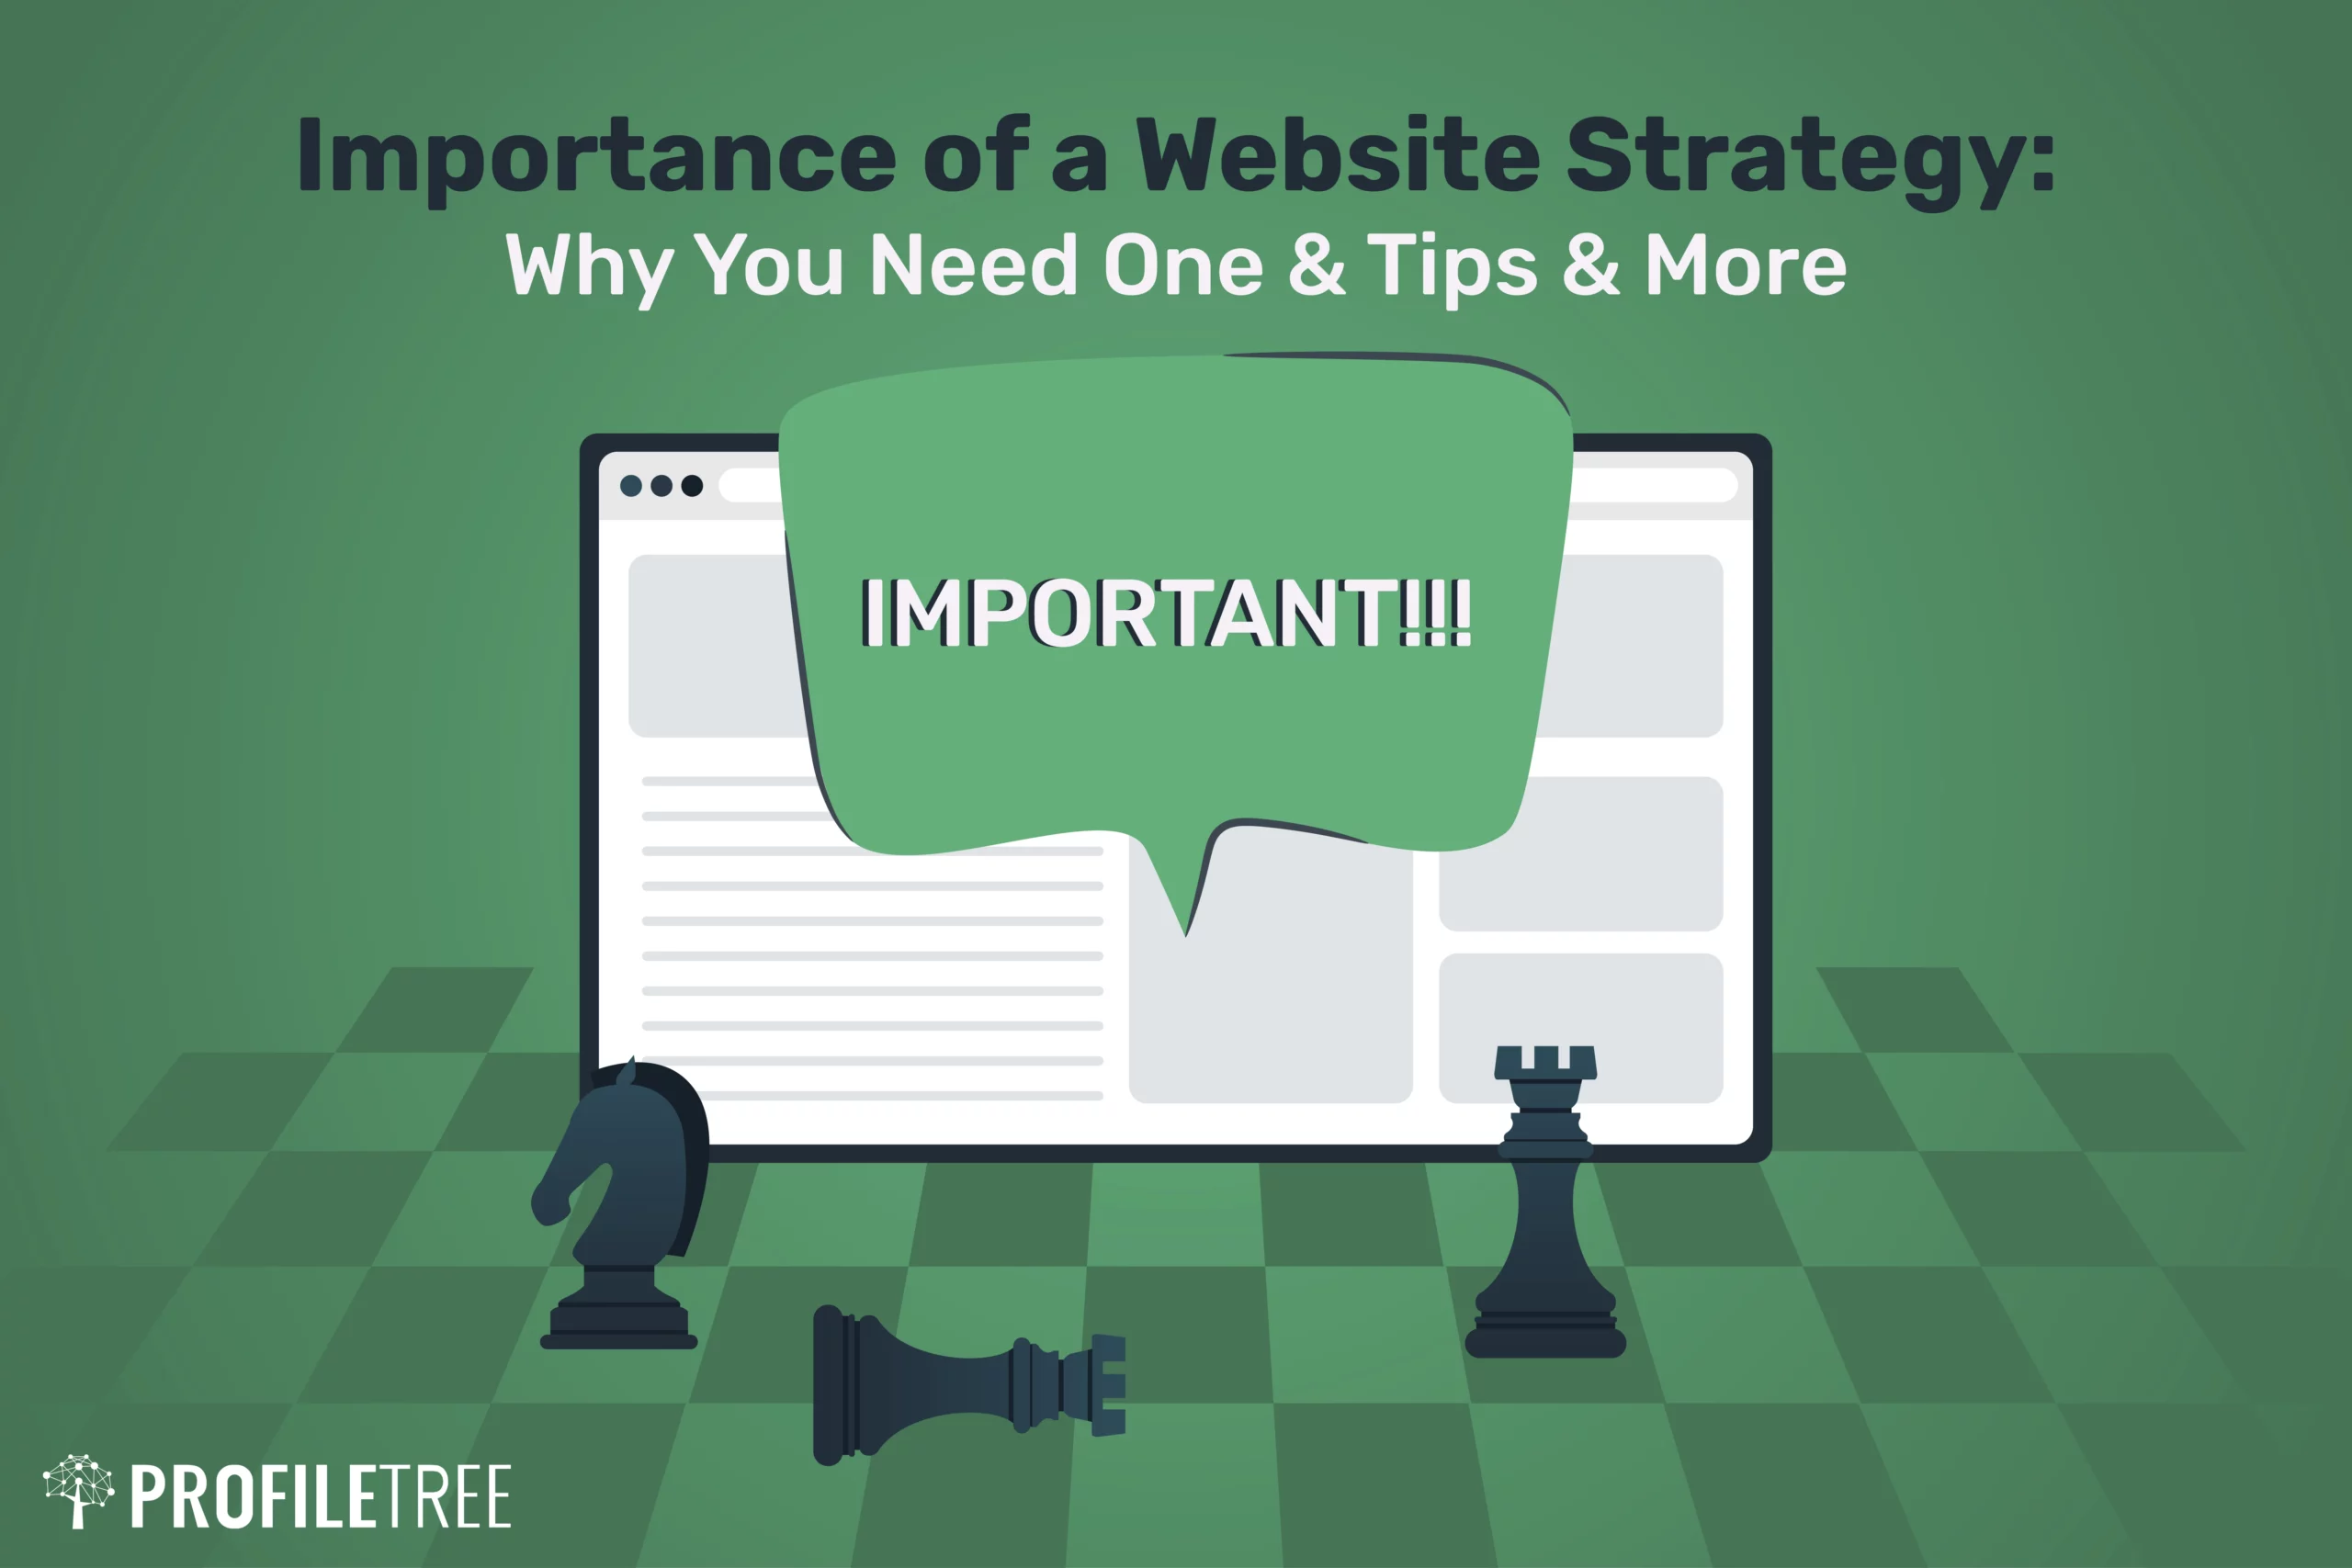 Importance of a Website Strategy Why You Need One & Tips & More